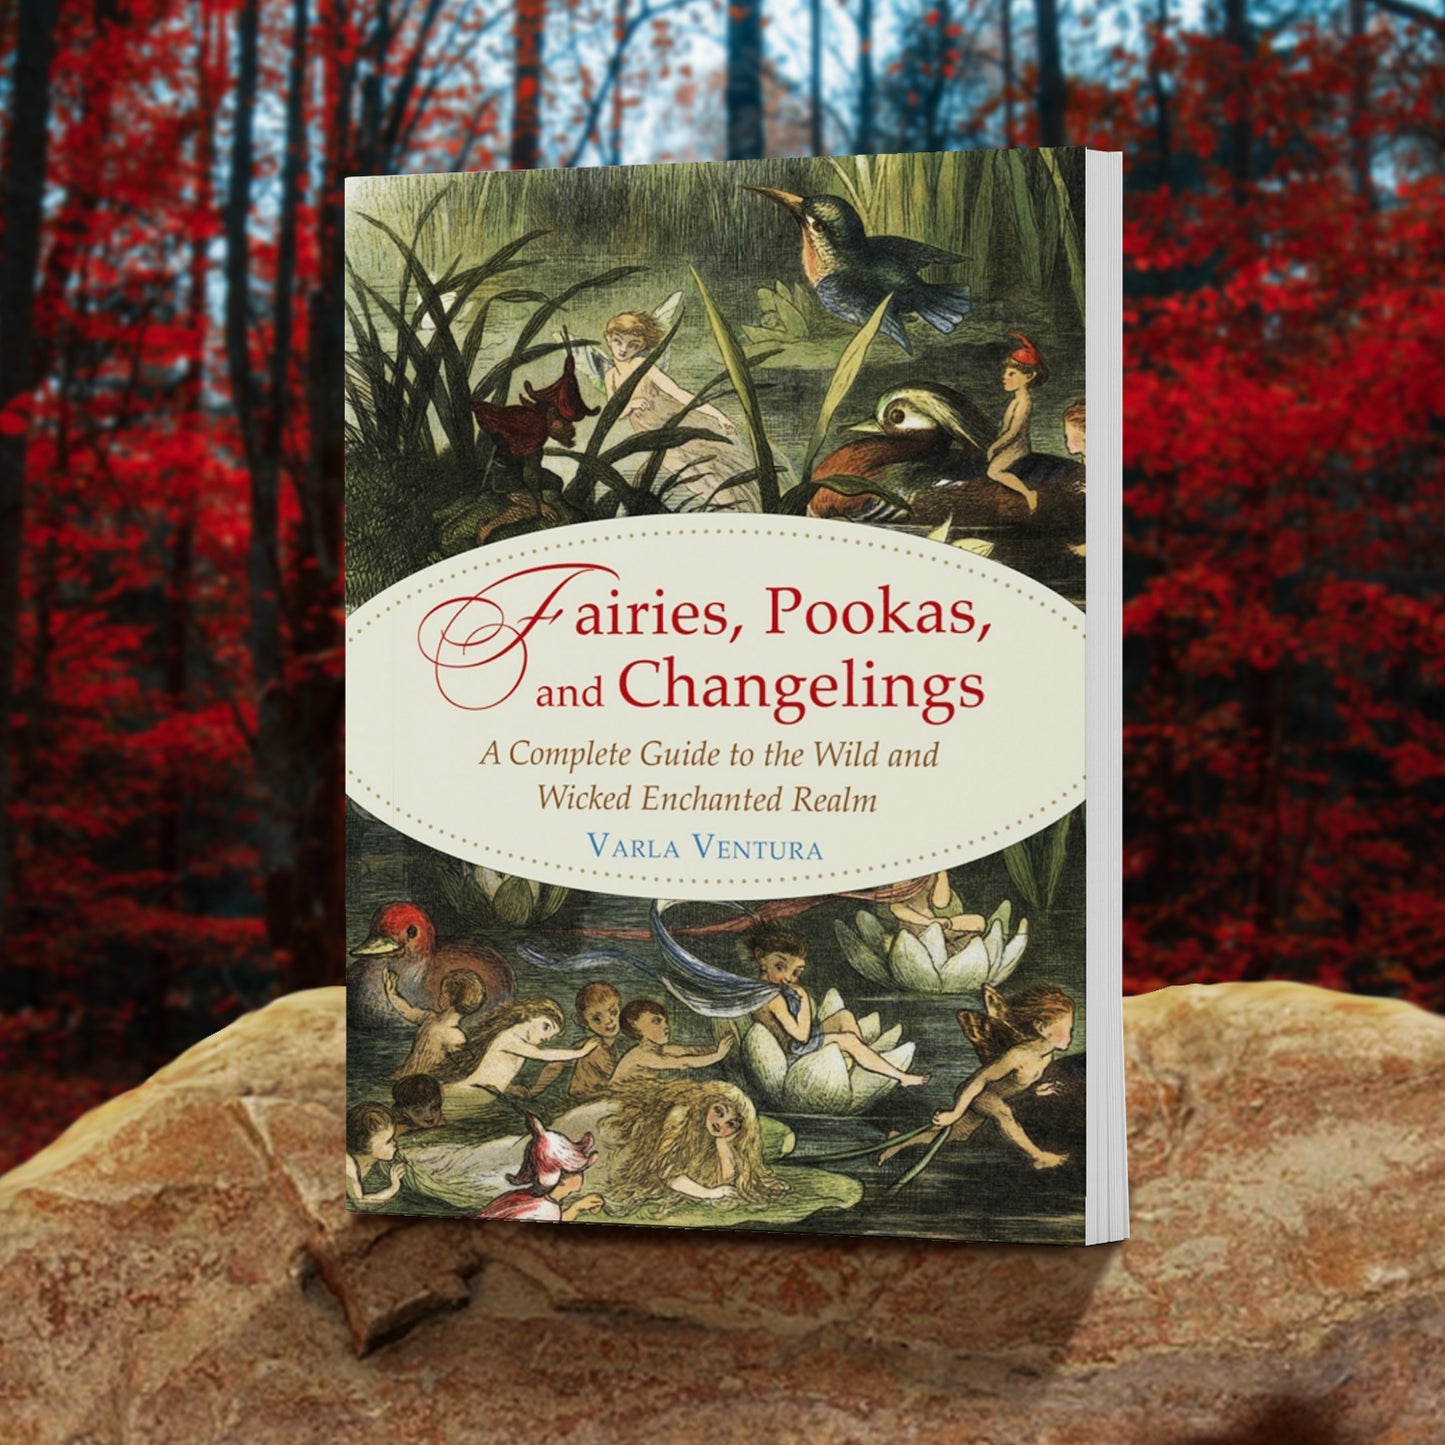 A green book on a rock, against a background of red-leaved trees. On the cover is a drawing of a marsh, with tall grass and lily pads. Scattered around the marsh are various fairies and other small mythical creatures, alongside birds. At the center of the cover is a white oval. In the oval is red and tan text saying "Fairies, pookas, and changelings: a complete guide to the wild and wicked enchanted realm.